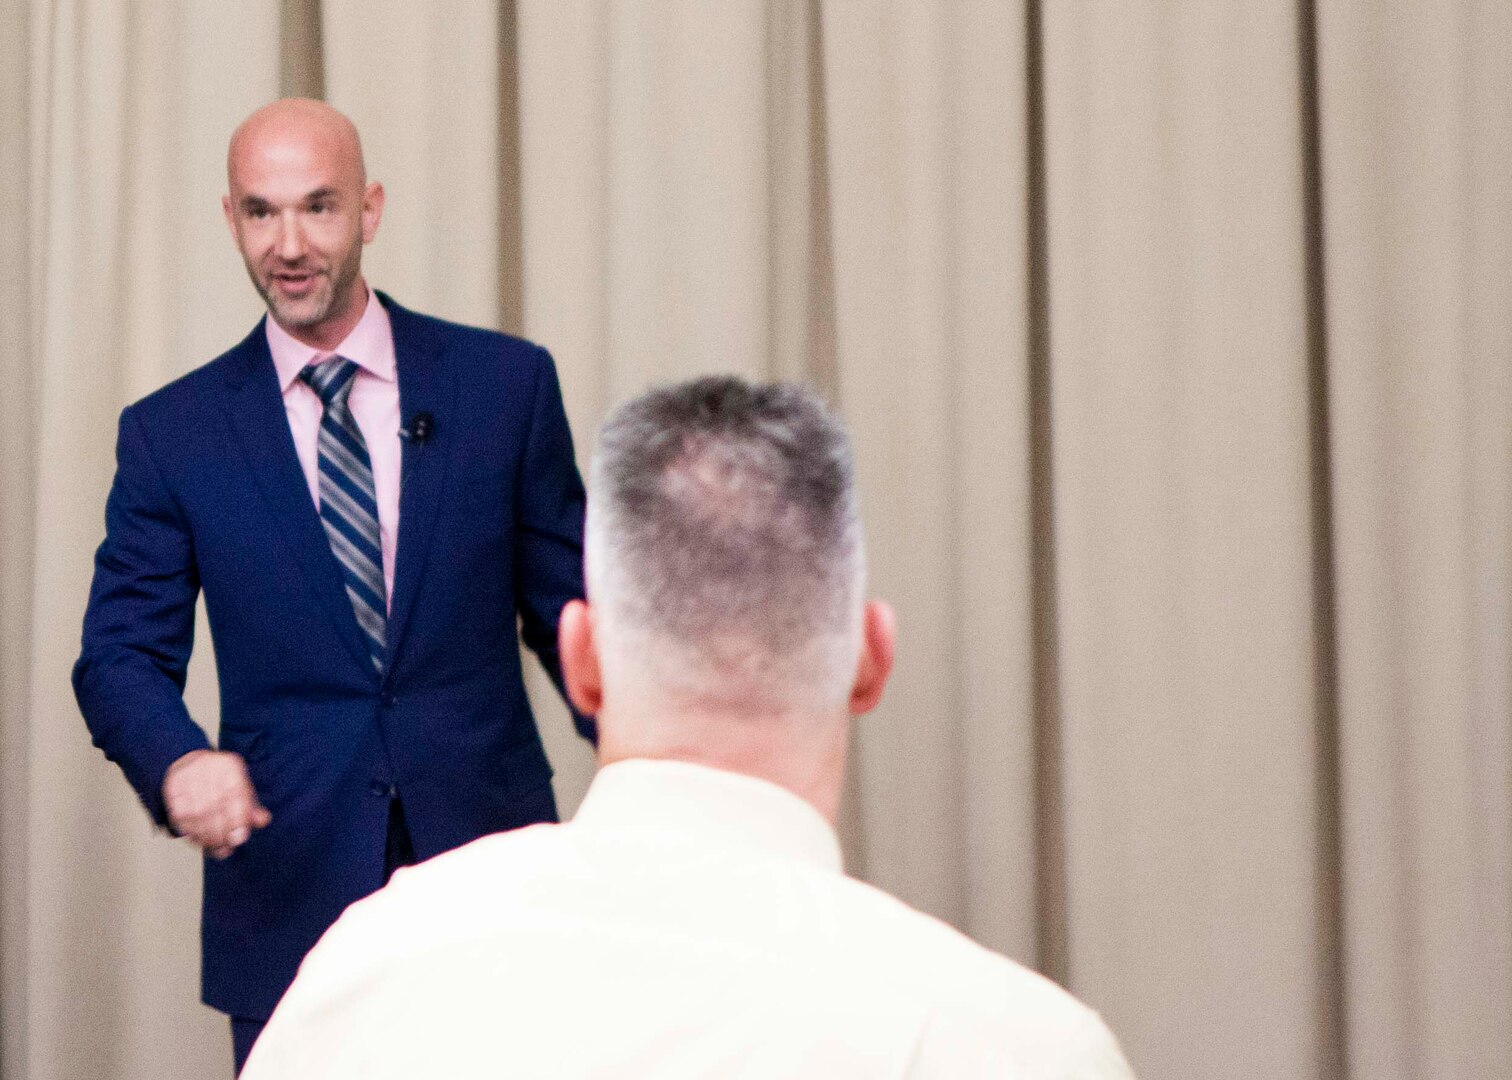 Matt Schrier, photographer and former Syrian hostage, talks about his escape from terrorists in 2013 during the Defense Distribution Center Susquehanna’s quarterly Force Protection Lecture Series. 